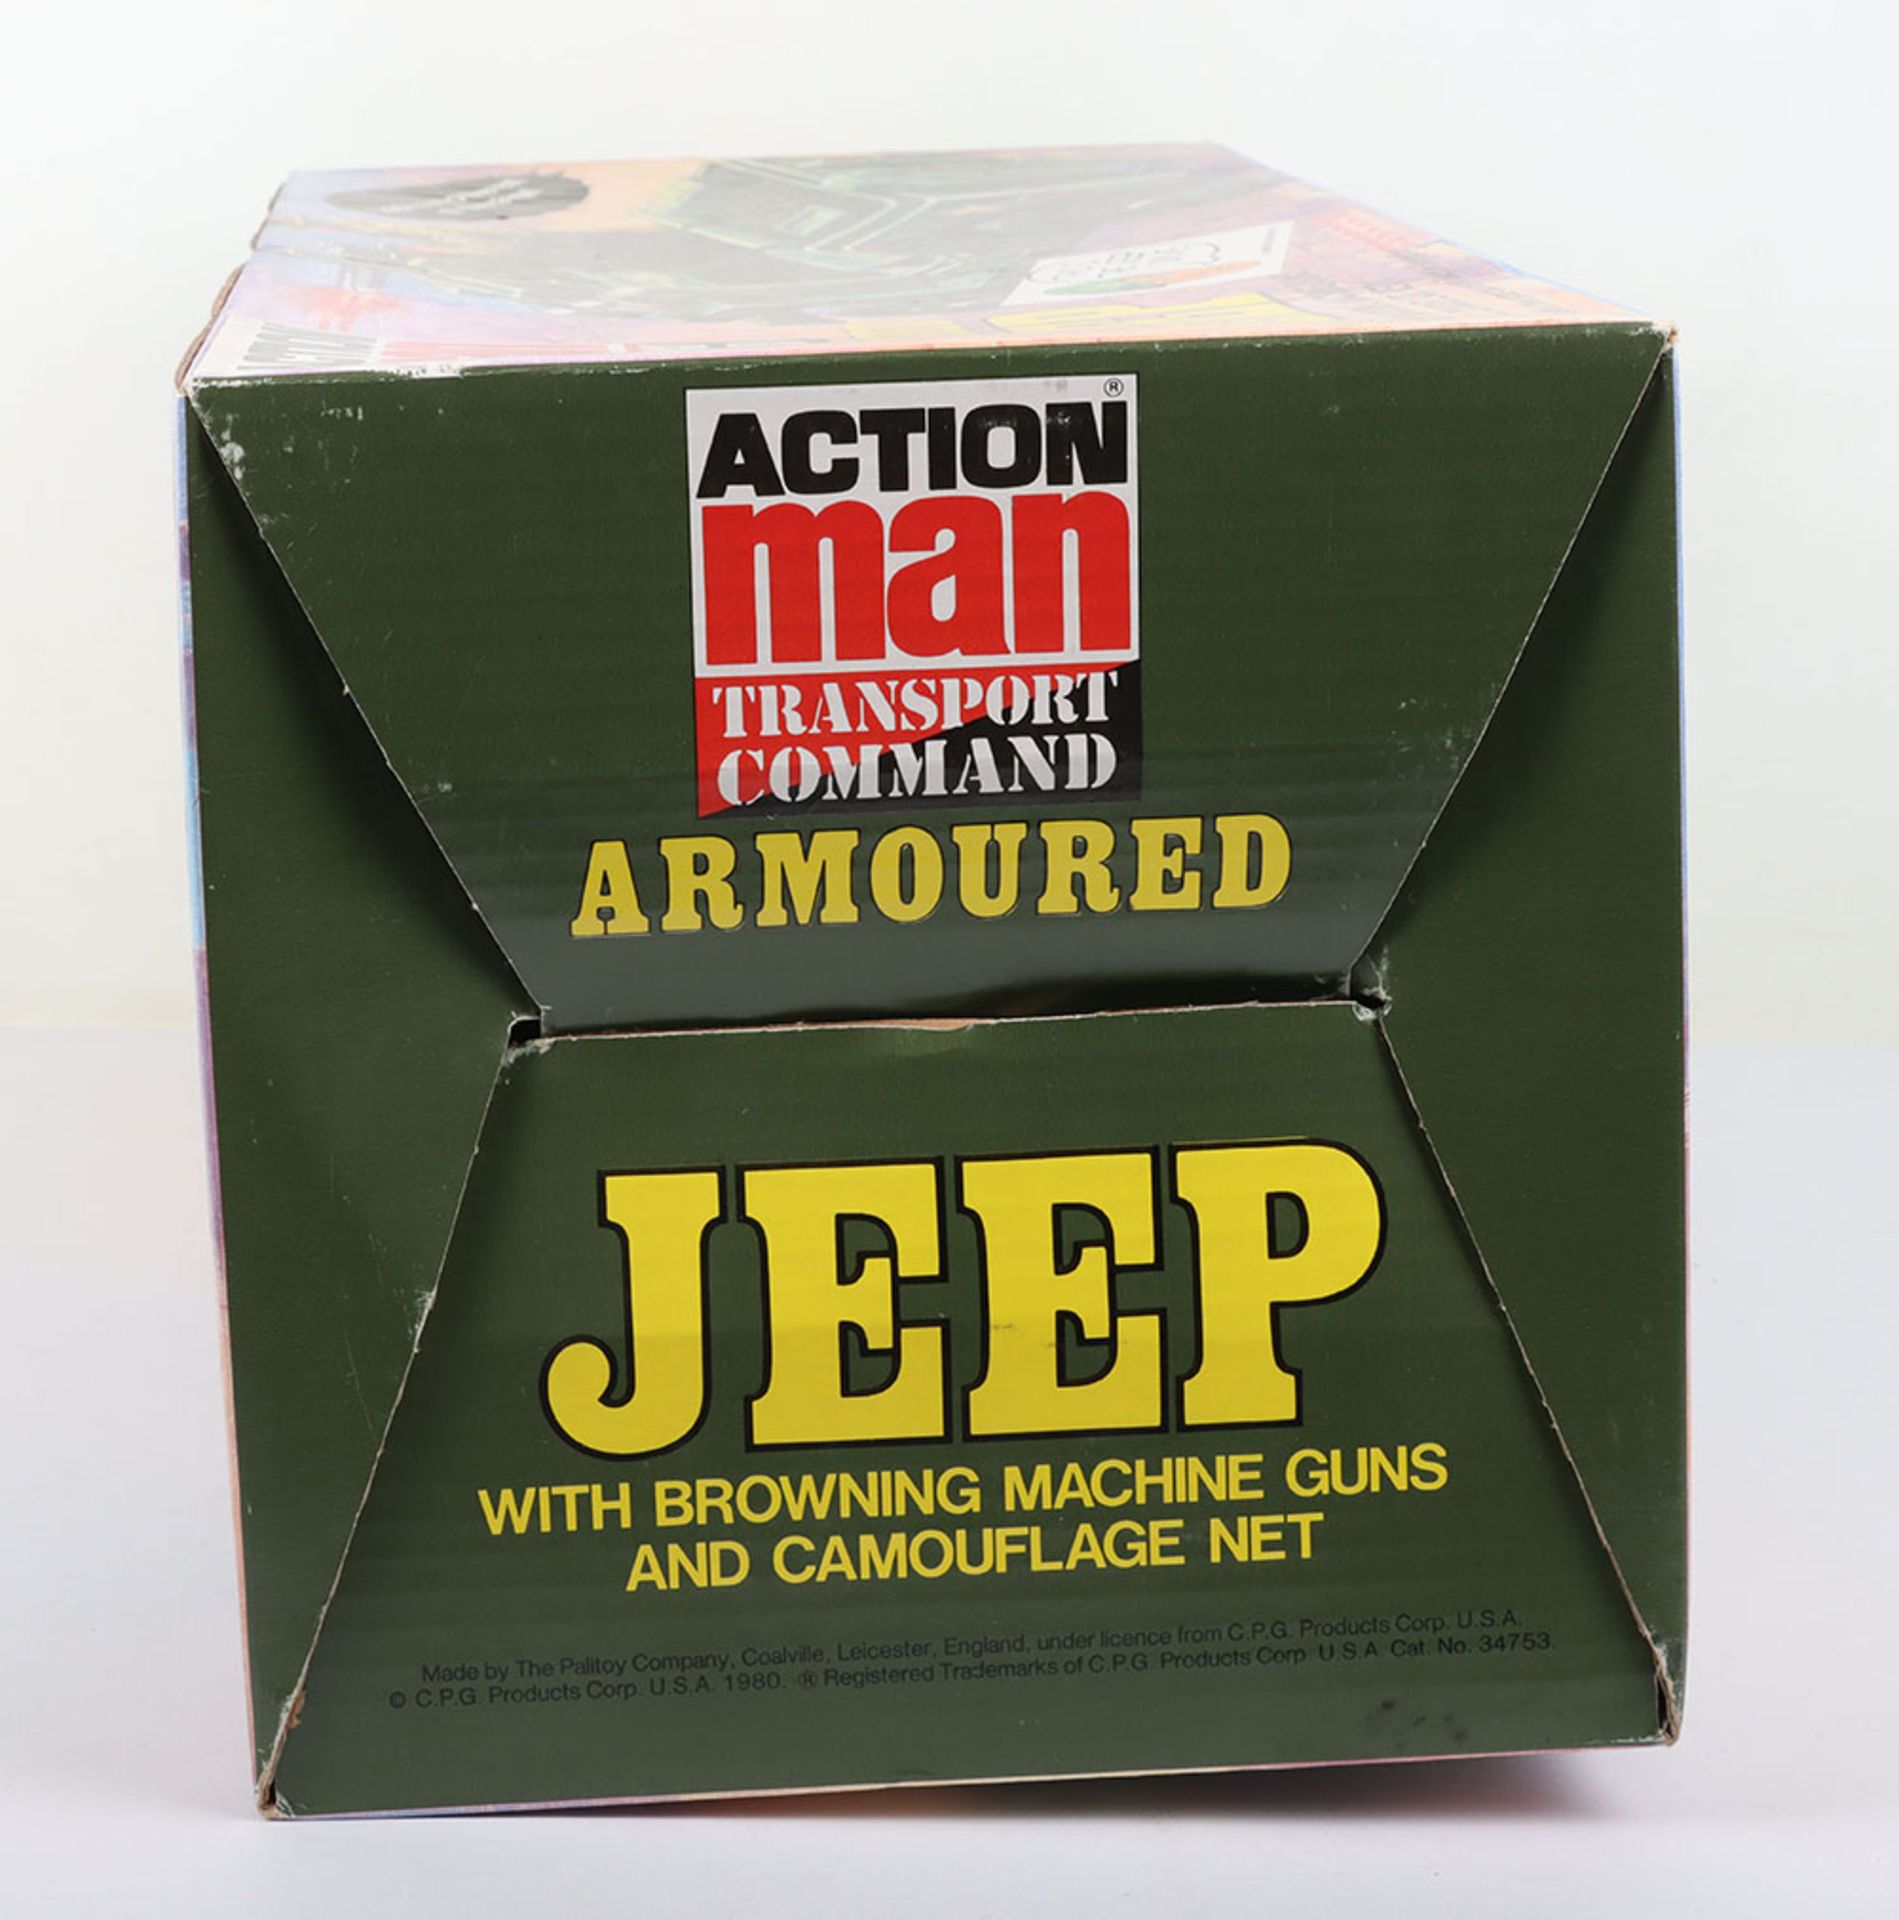 Palitoy Action Man Transport Command Armoured Jeep - Image 5 of 5